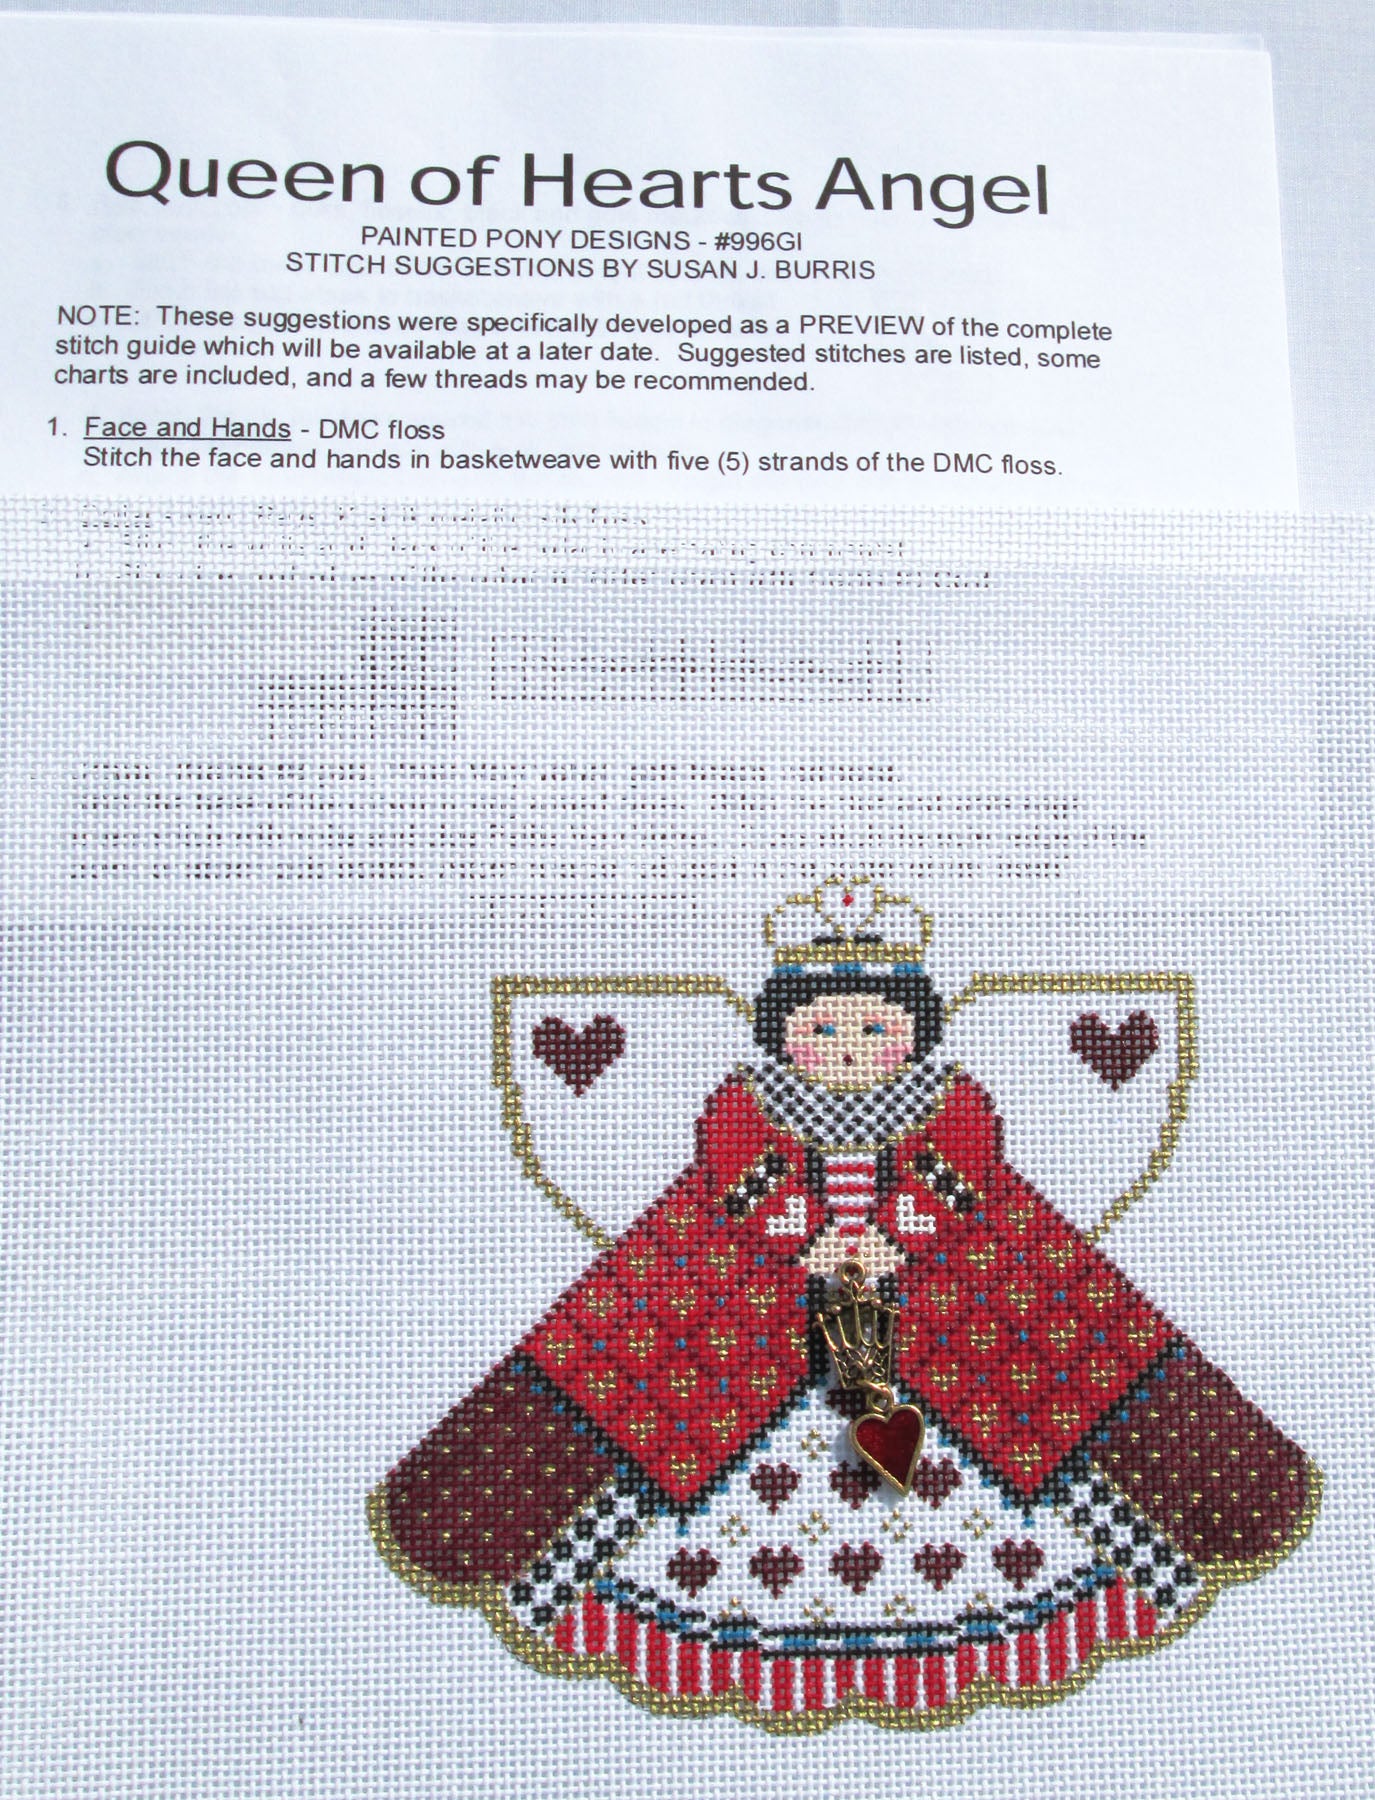 Angel ~ Queen of Hearts Angel, Charms & STITCH GUIDE handpainted Needlepoint Ornament by Painted Pony